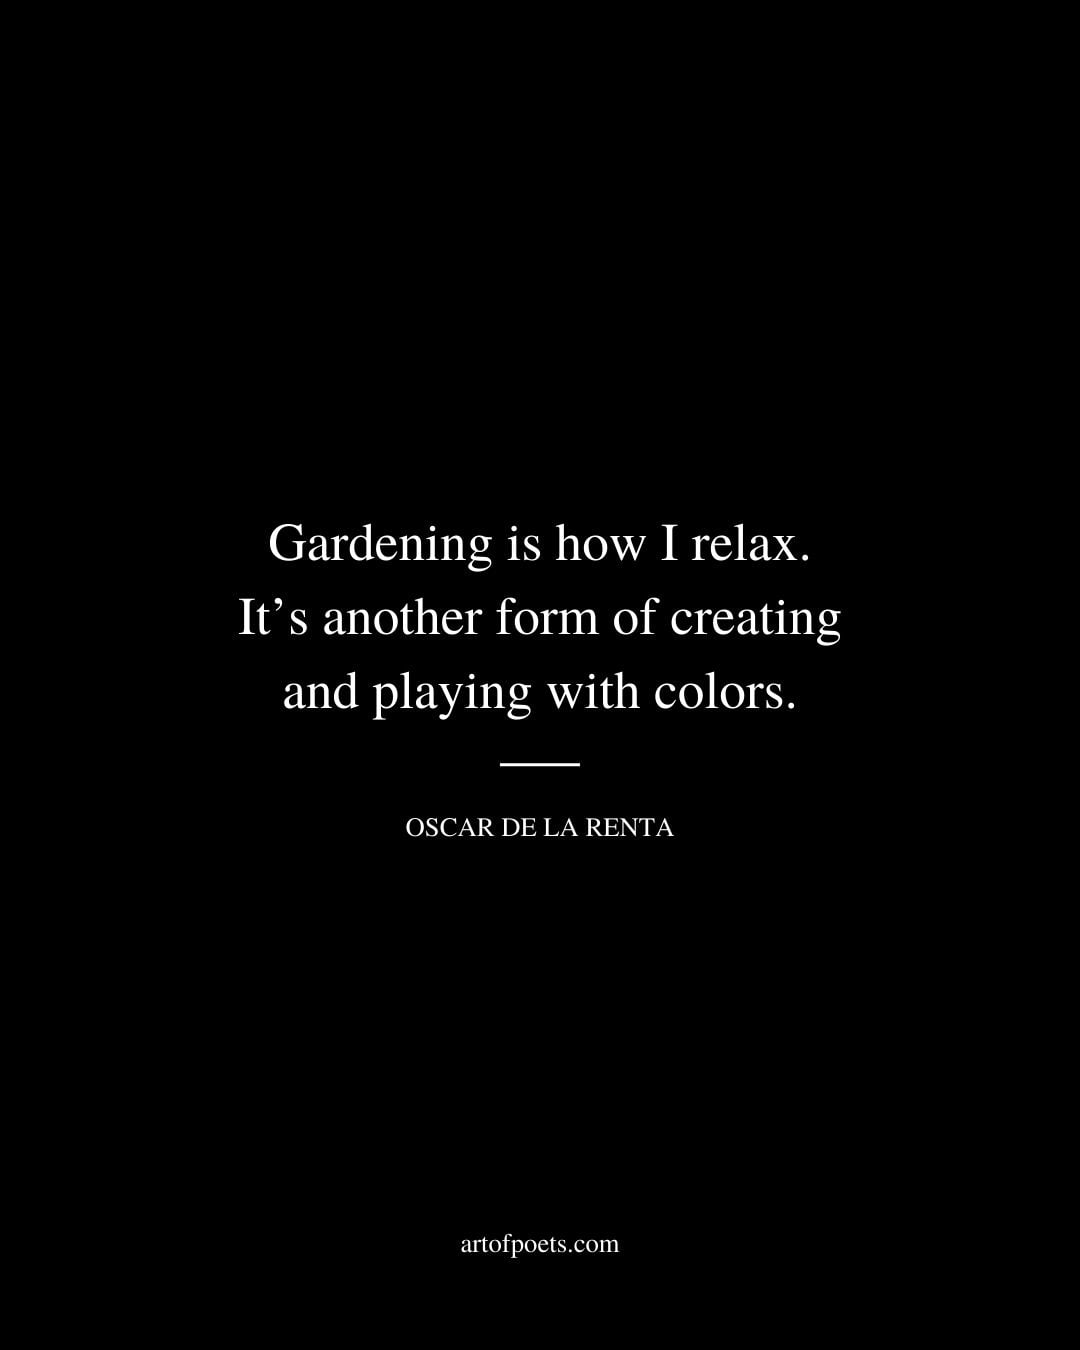 Gardening is how I relax. Its another form of creating and playing with colors. Oscar de la Renta